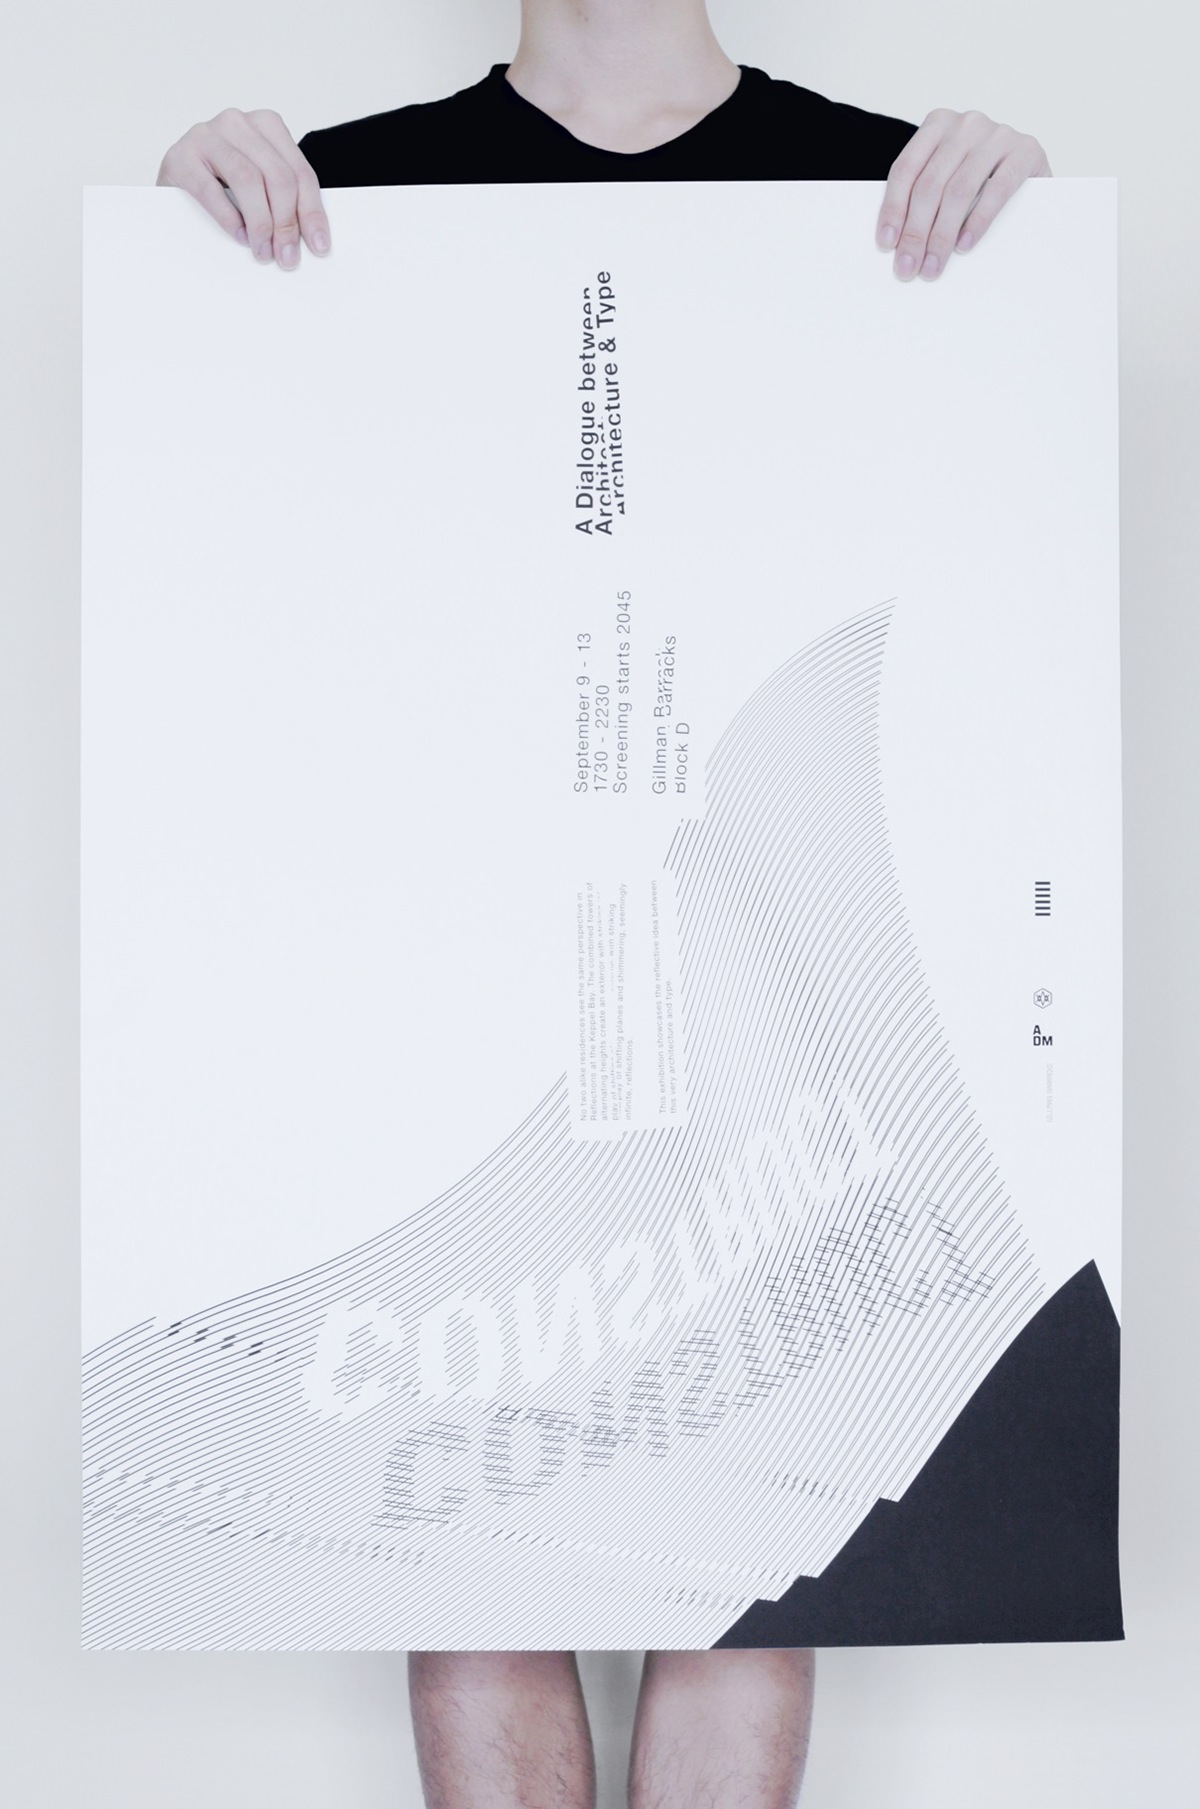 Exhibition  poster brochure White minimalist reflections Keppel construct information folds interesting deconstructed print contemporary collaterals